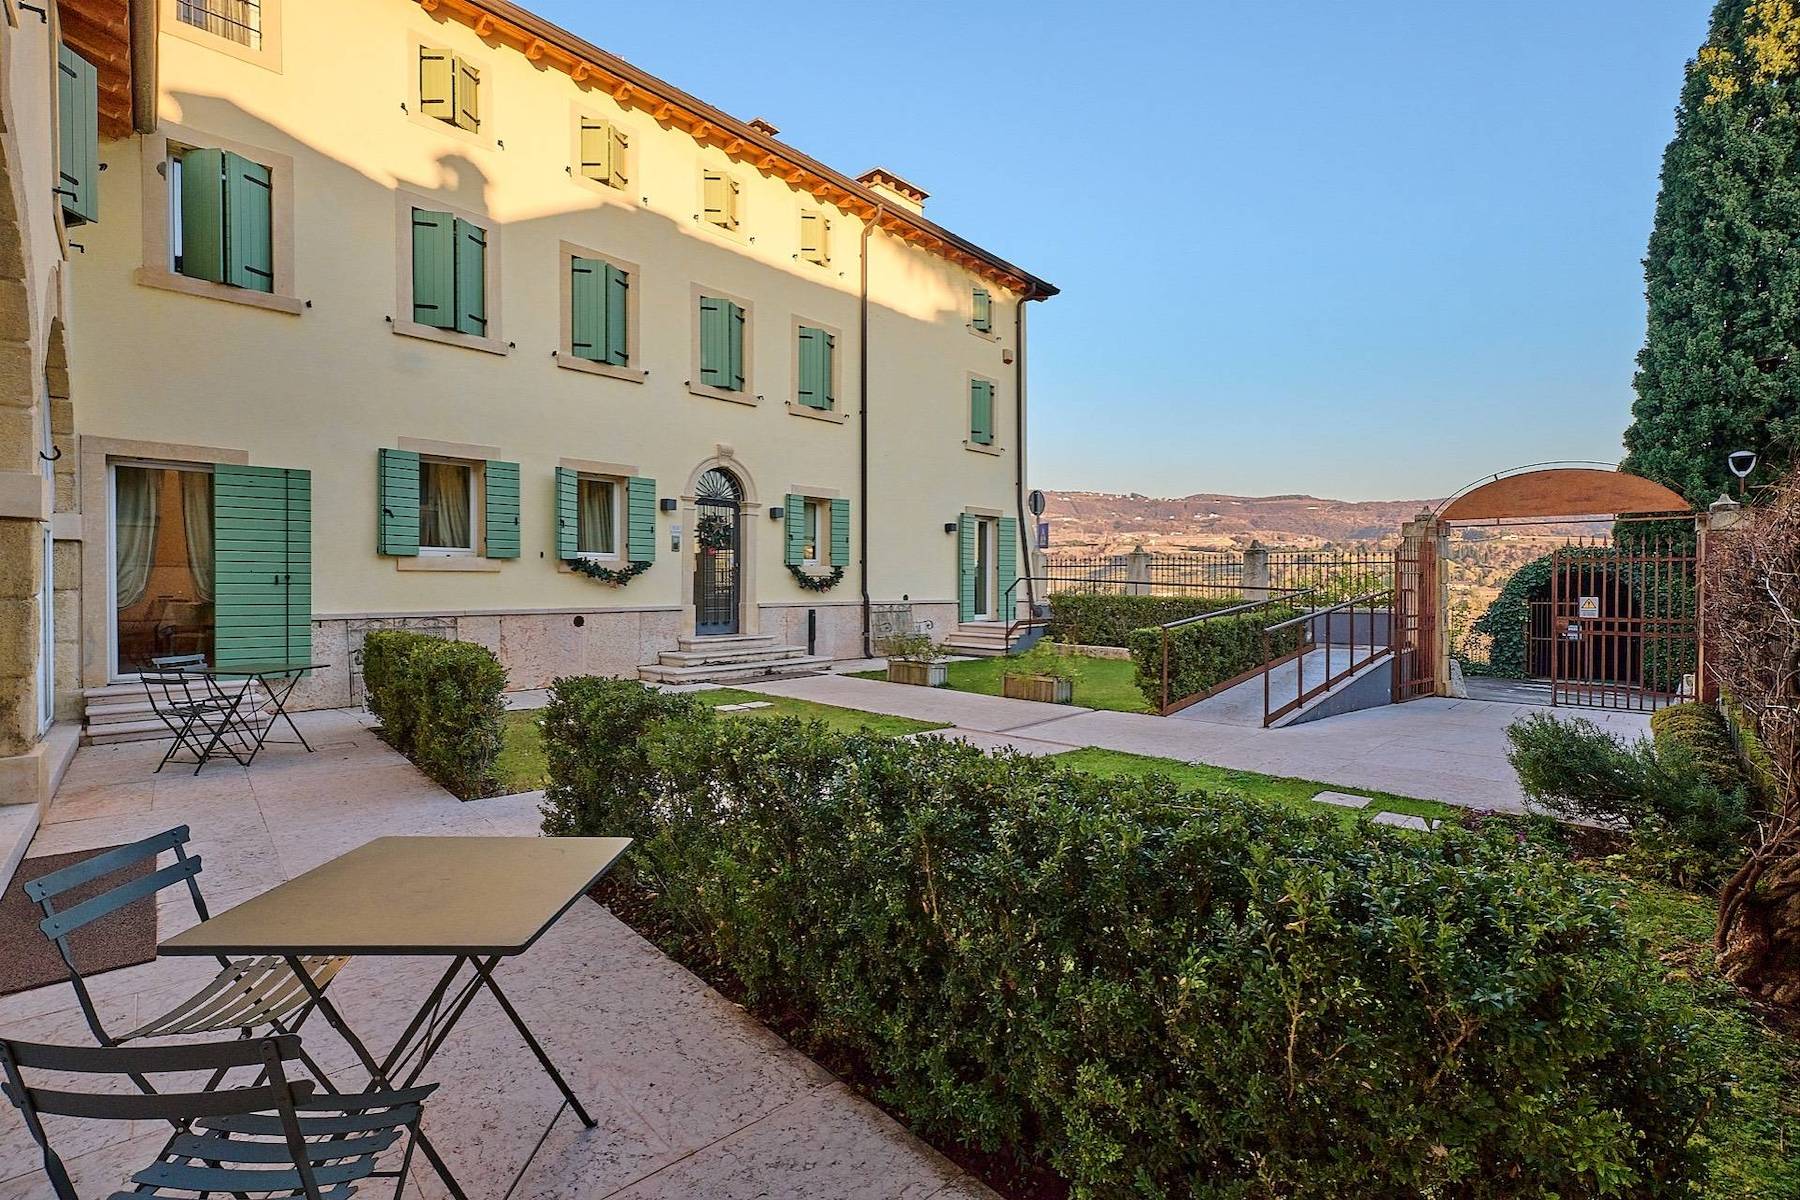 Villa used as charming hotel on the Valpolicella hills